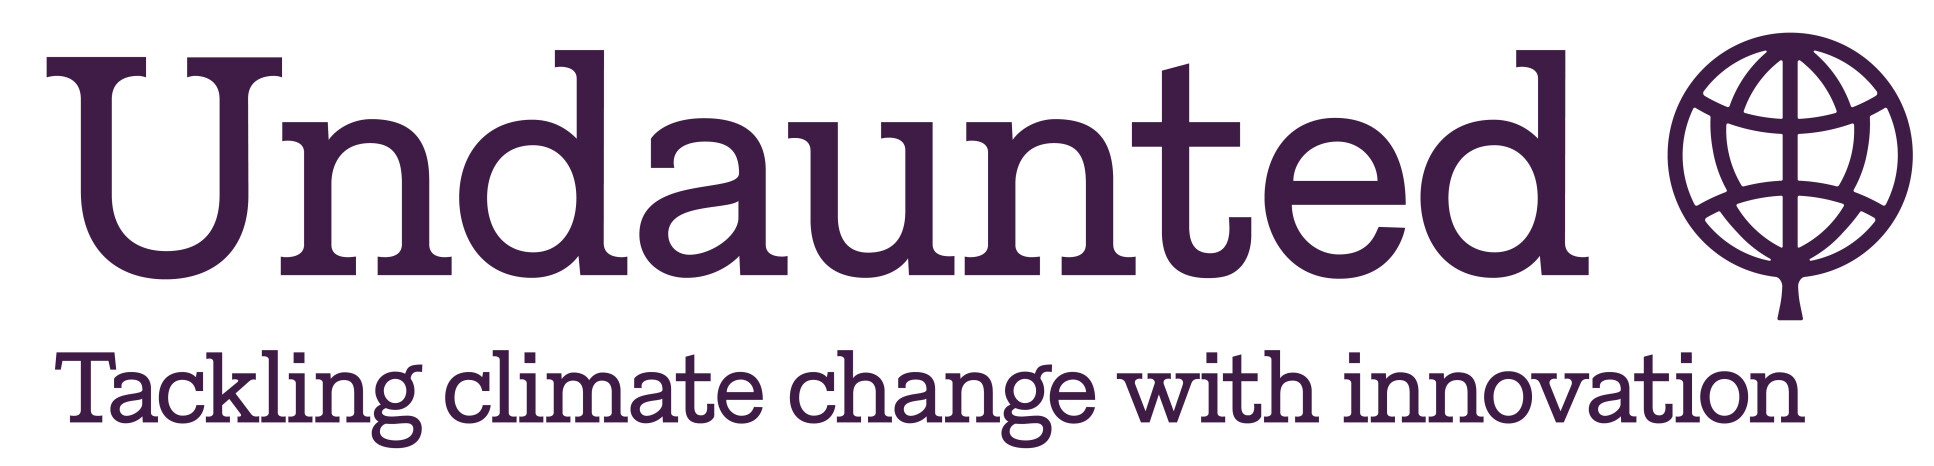 Undaunted logo: Tackling climate change with innovation